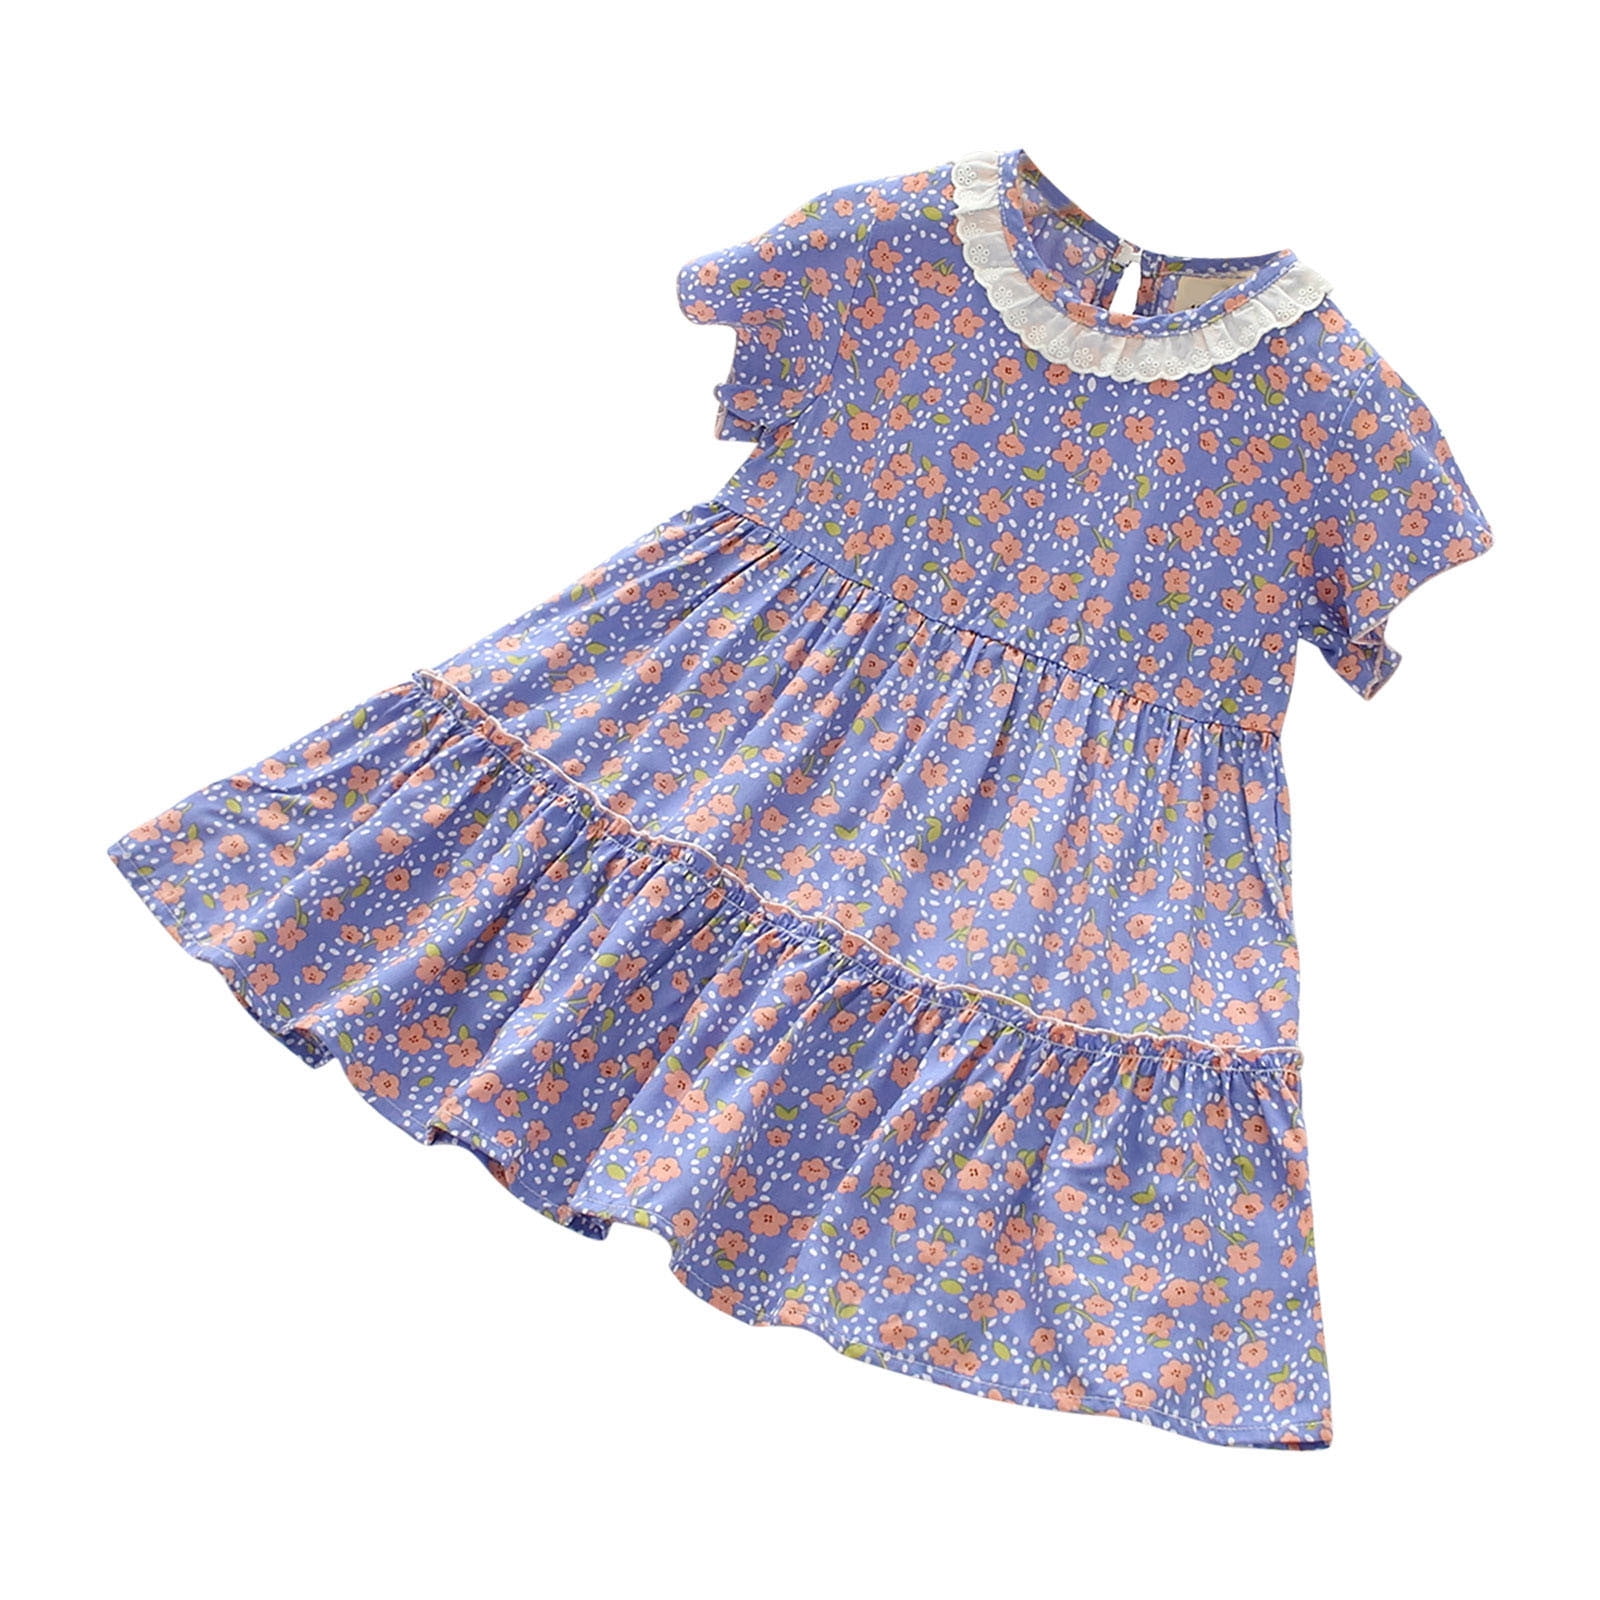 ZCFZJW Casual Girls Princess Dresses Cute Floral Printed Summer